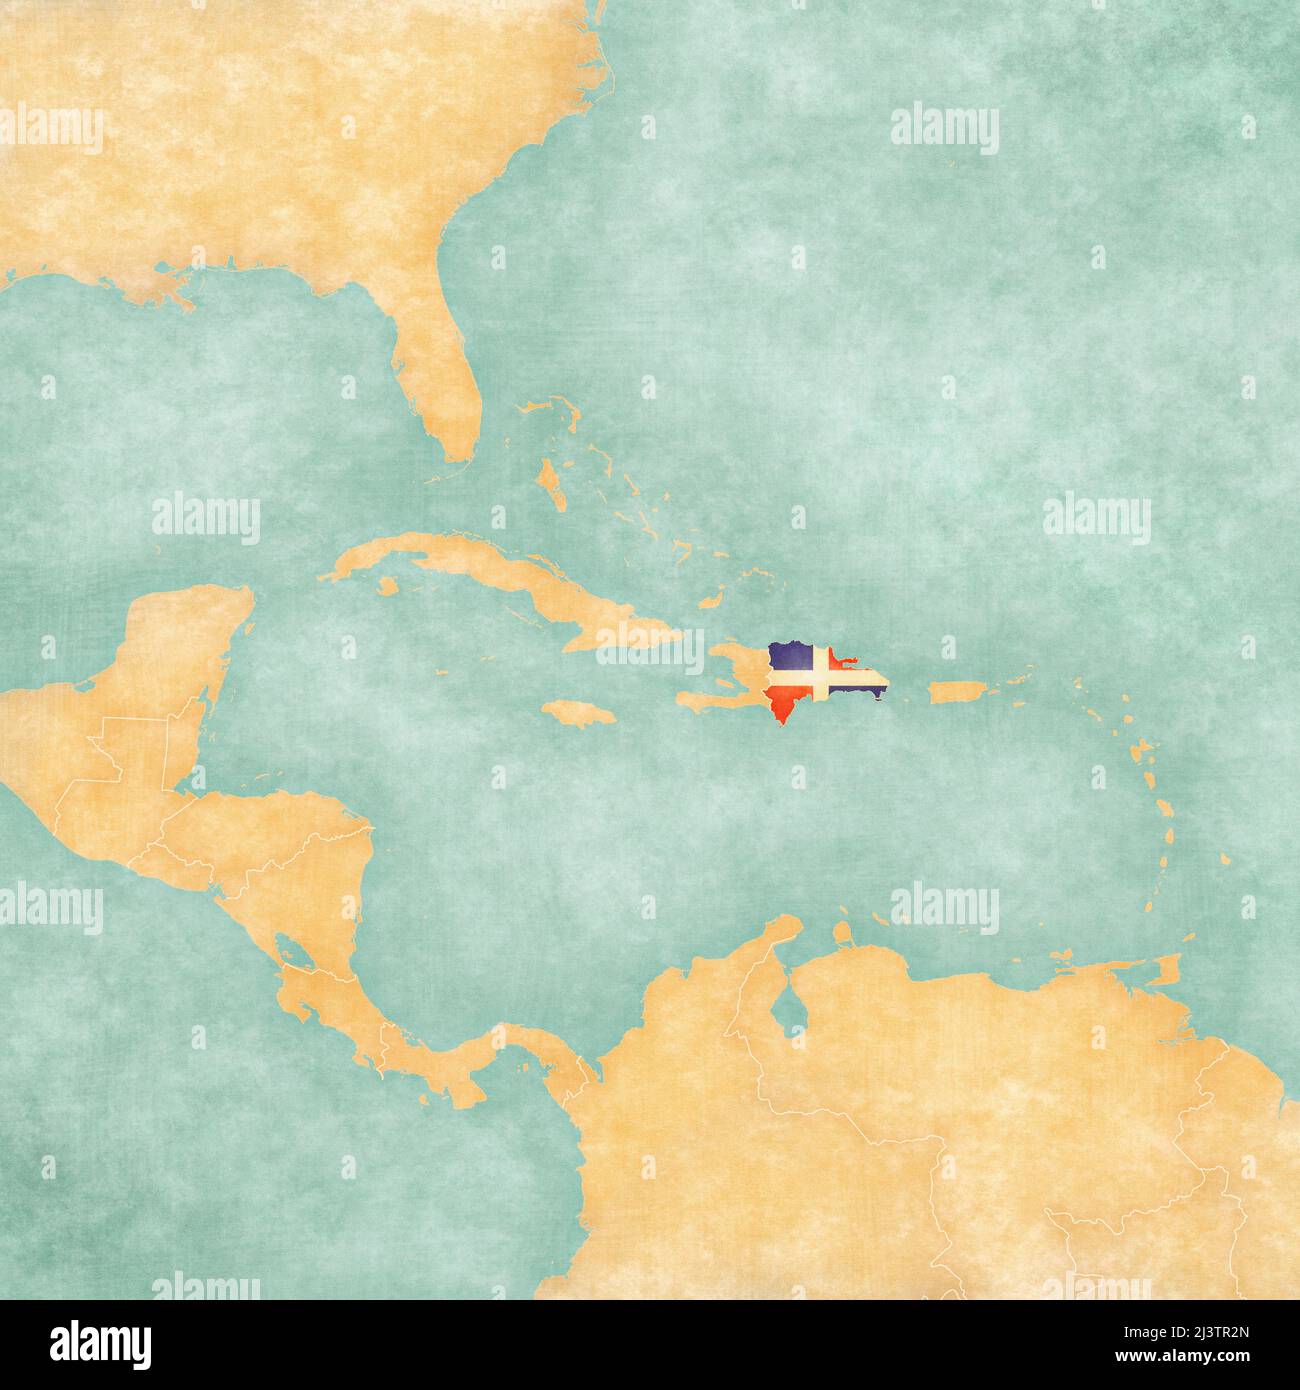 Dominican Republic (Dominican flag) on the map of Caribbean and Central America. The Map is in vintage summer style and sunny mood. The map has a soft Stock Photo